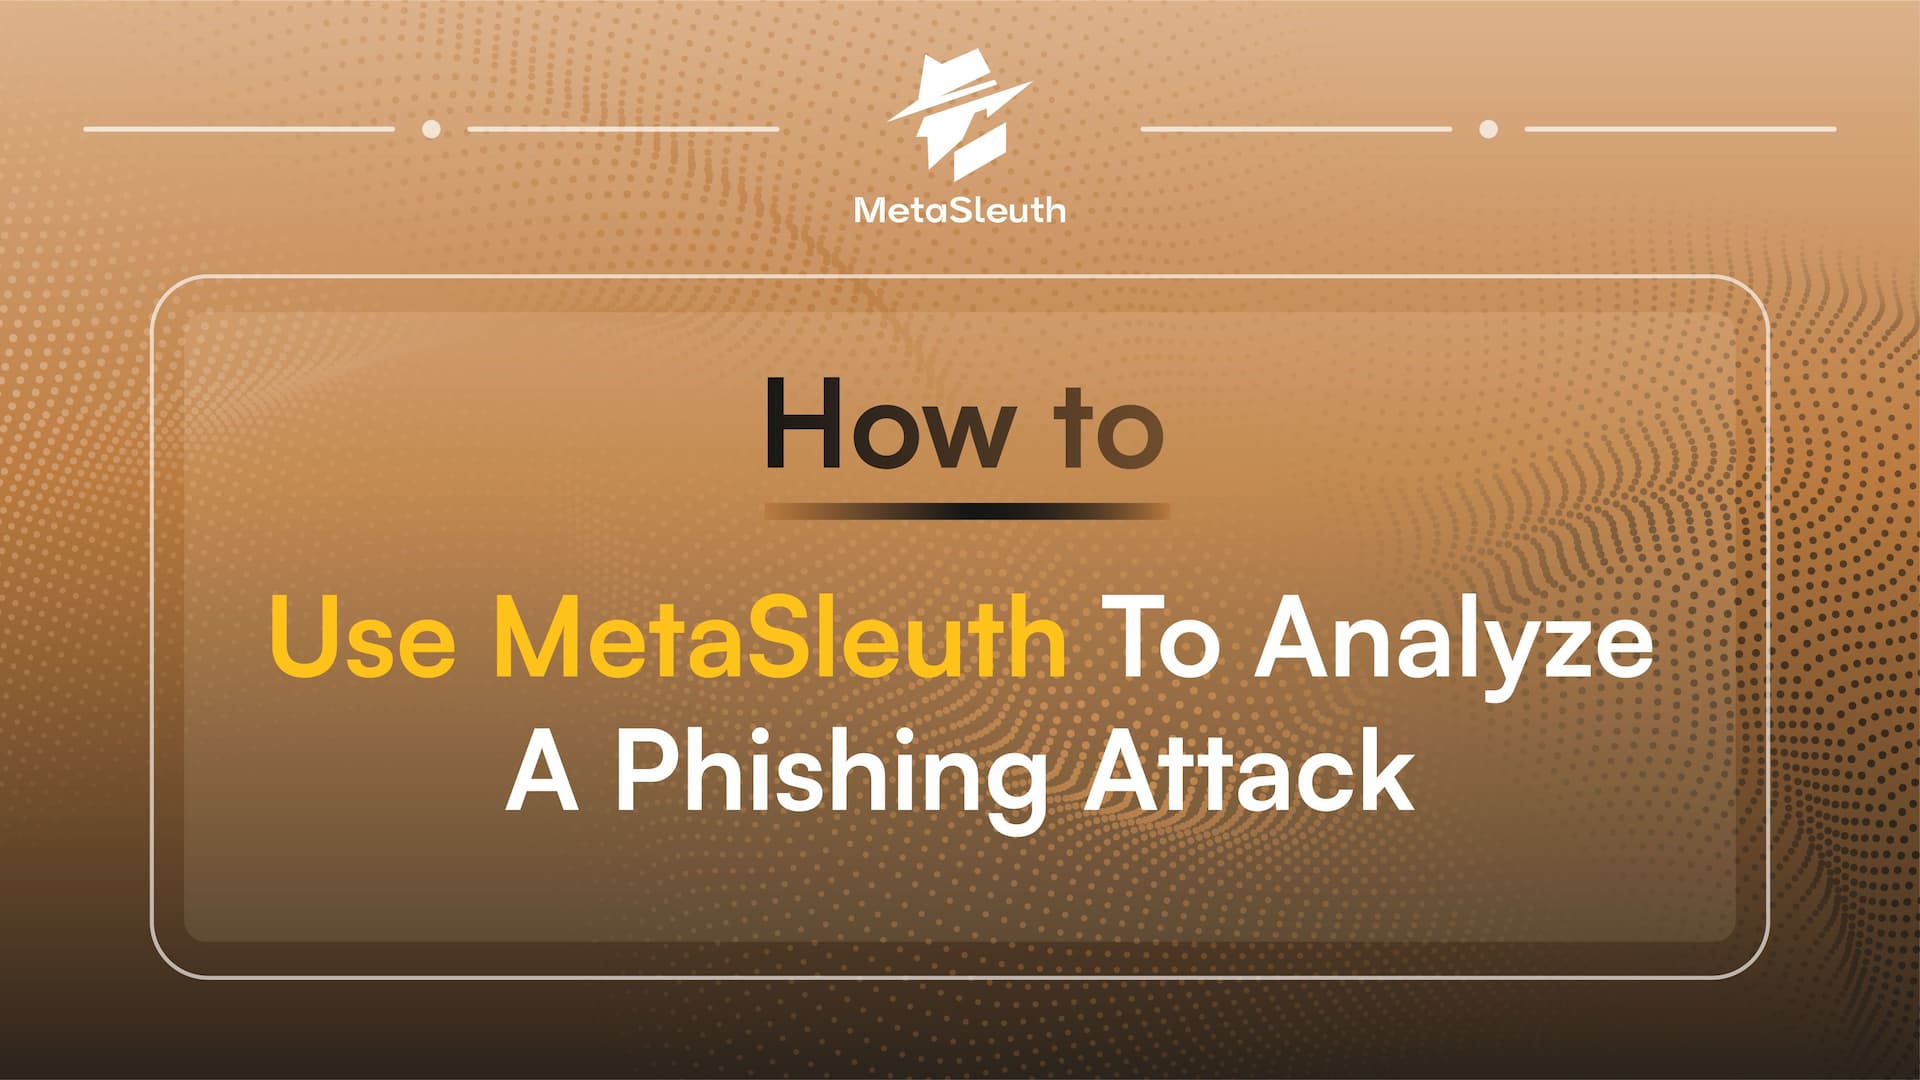 How to Use MetaSleuth to Analyze a Phishing Attack